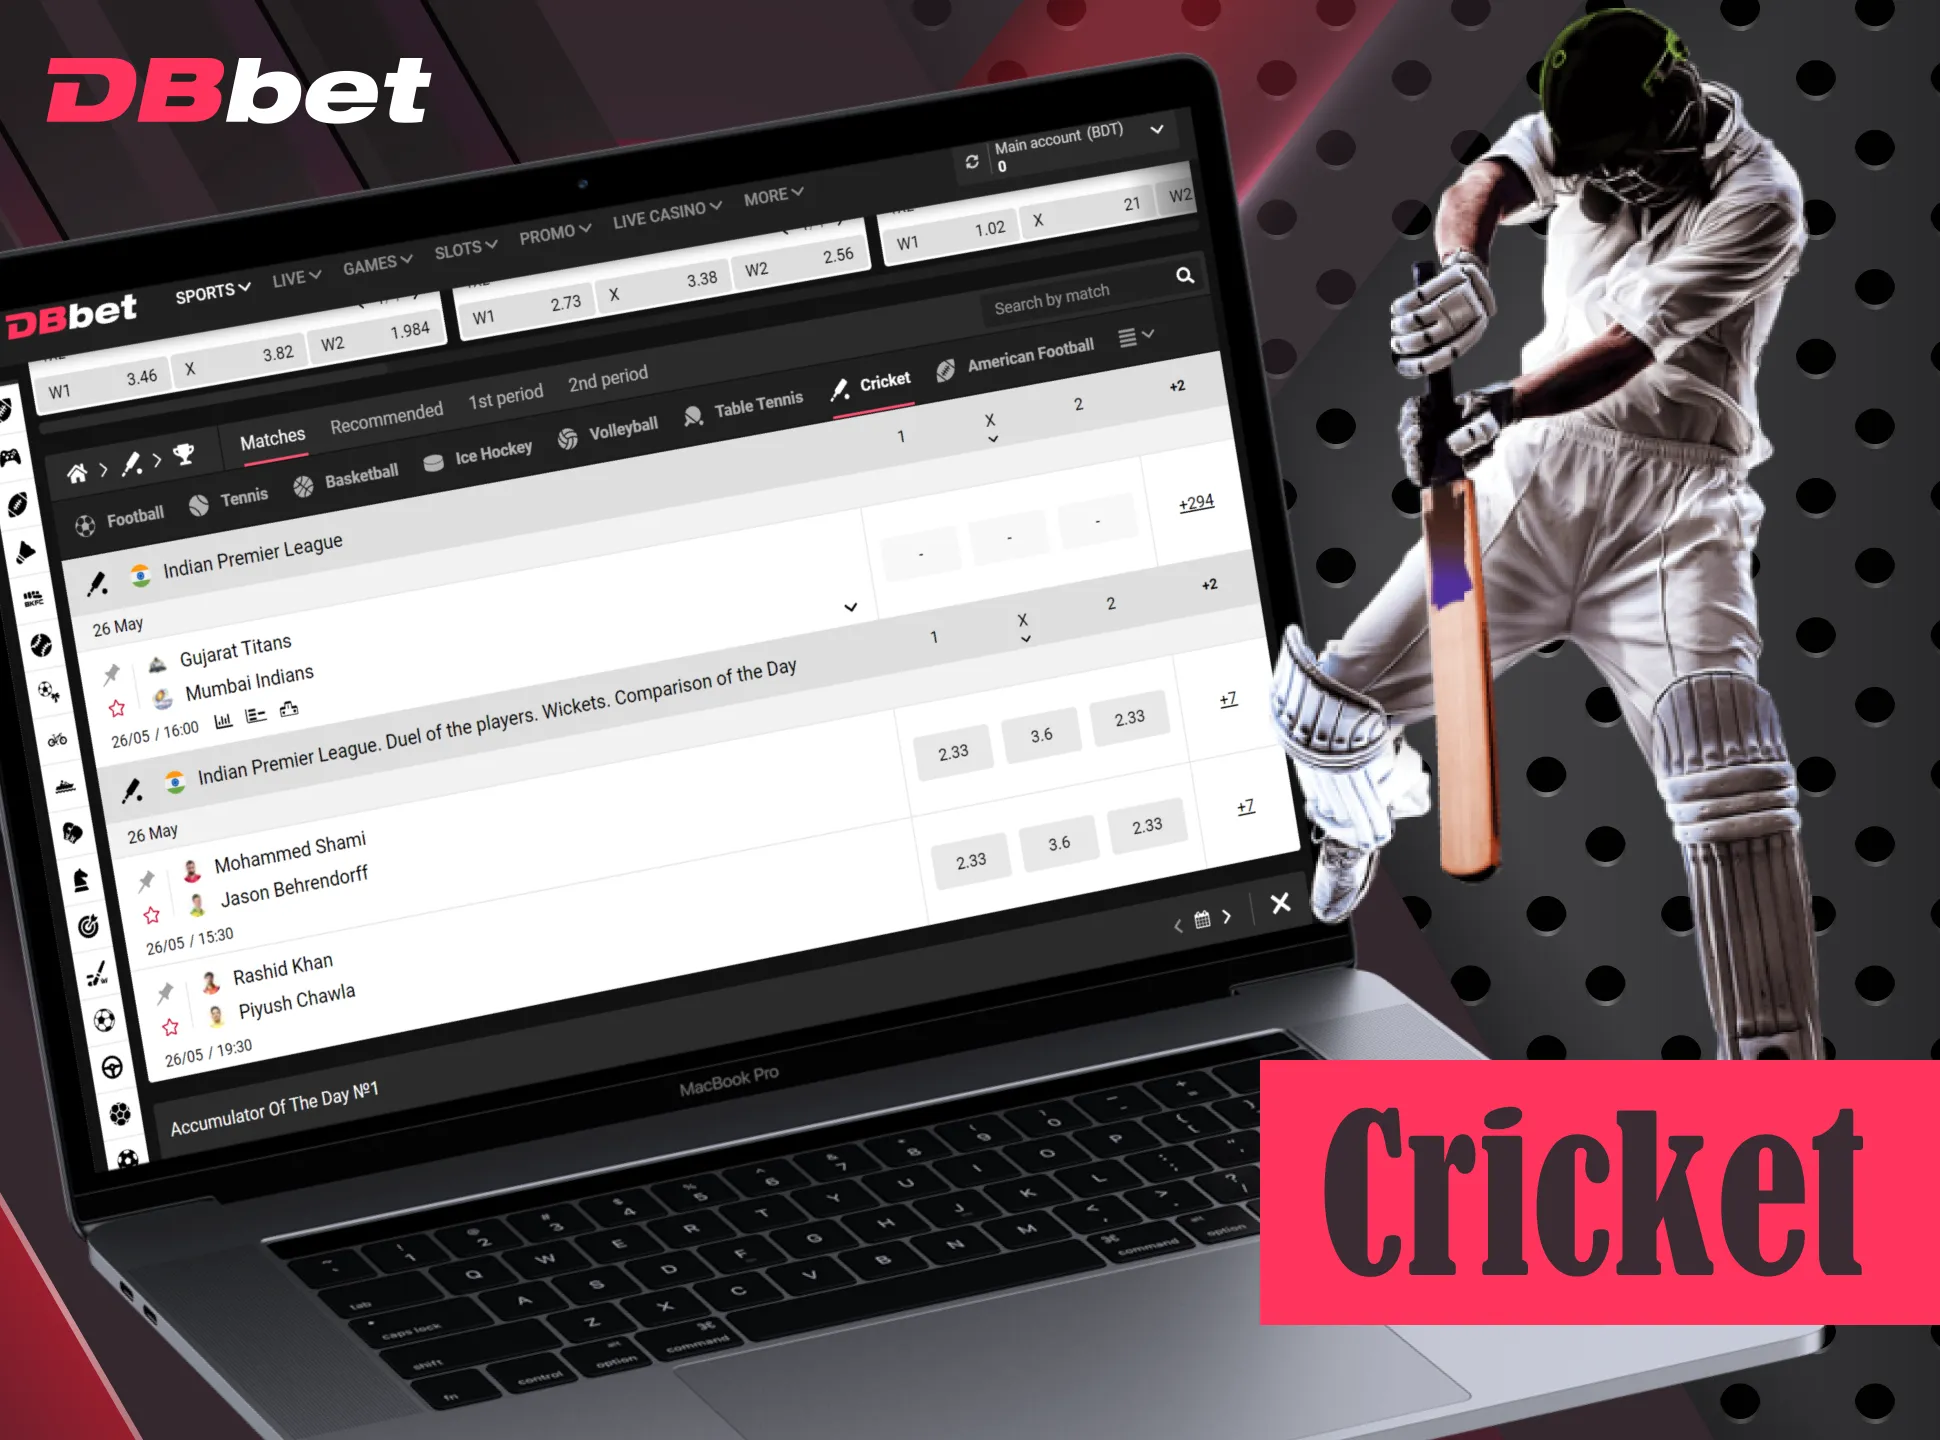 Watch and bet on cricket matches at DBbet.